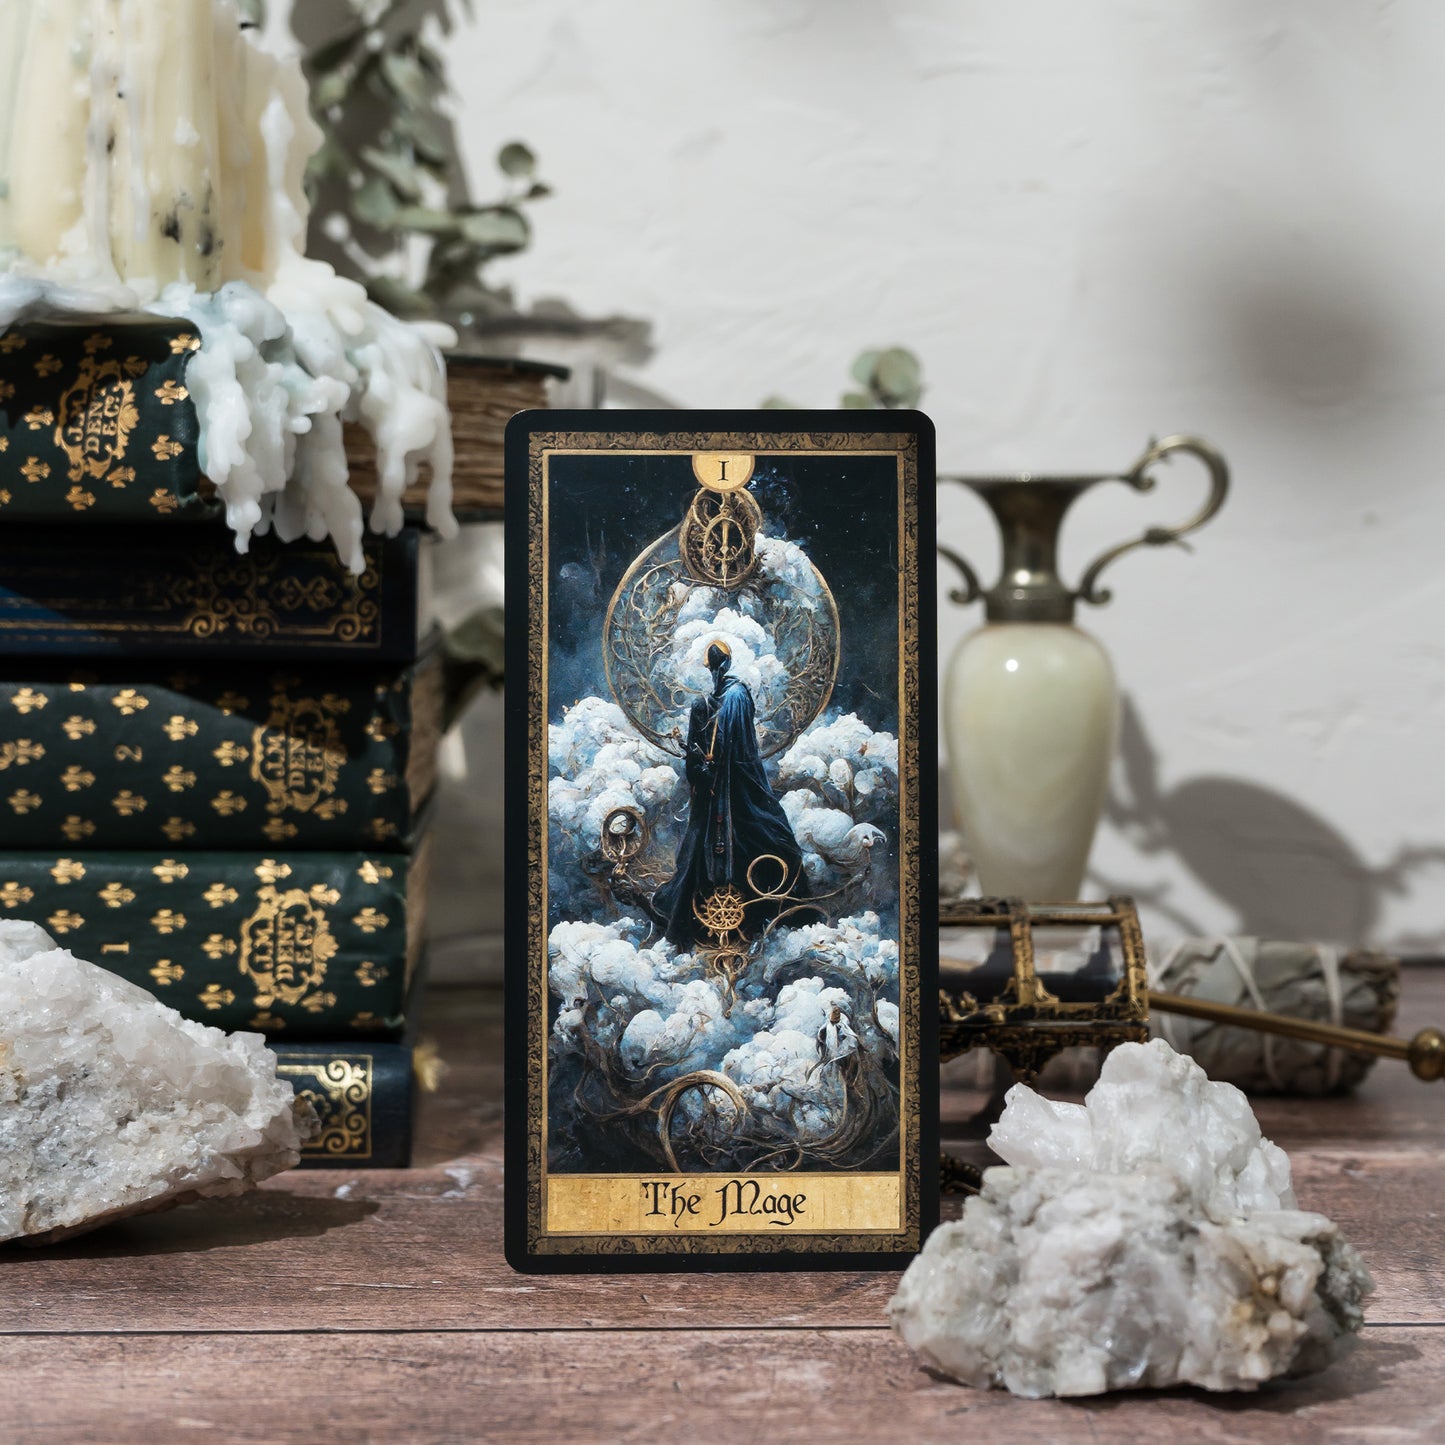 Detailed close-up of the Mage card from the Shadow Work Tarot Deck, highlighting the card's vivid, Victorian-inspired artwork and symbolism of intuition and inner wisdom.